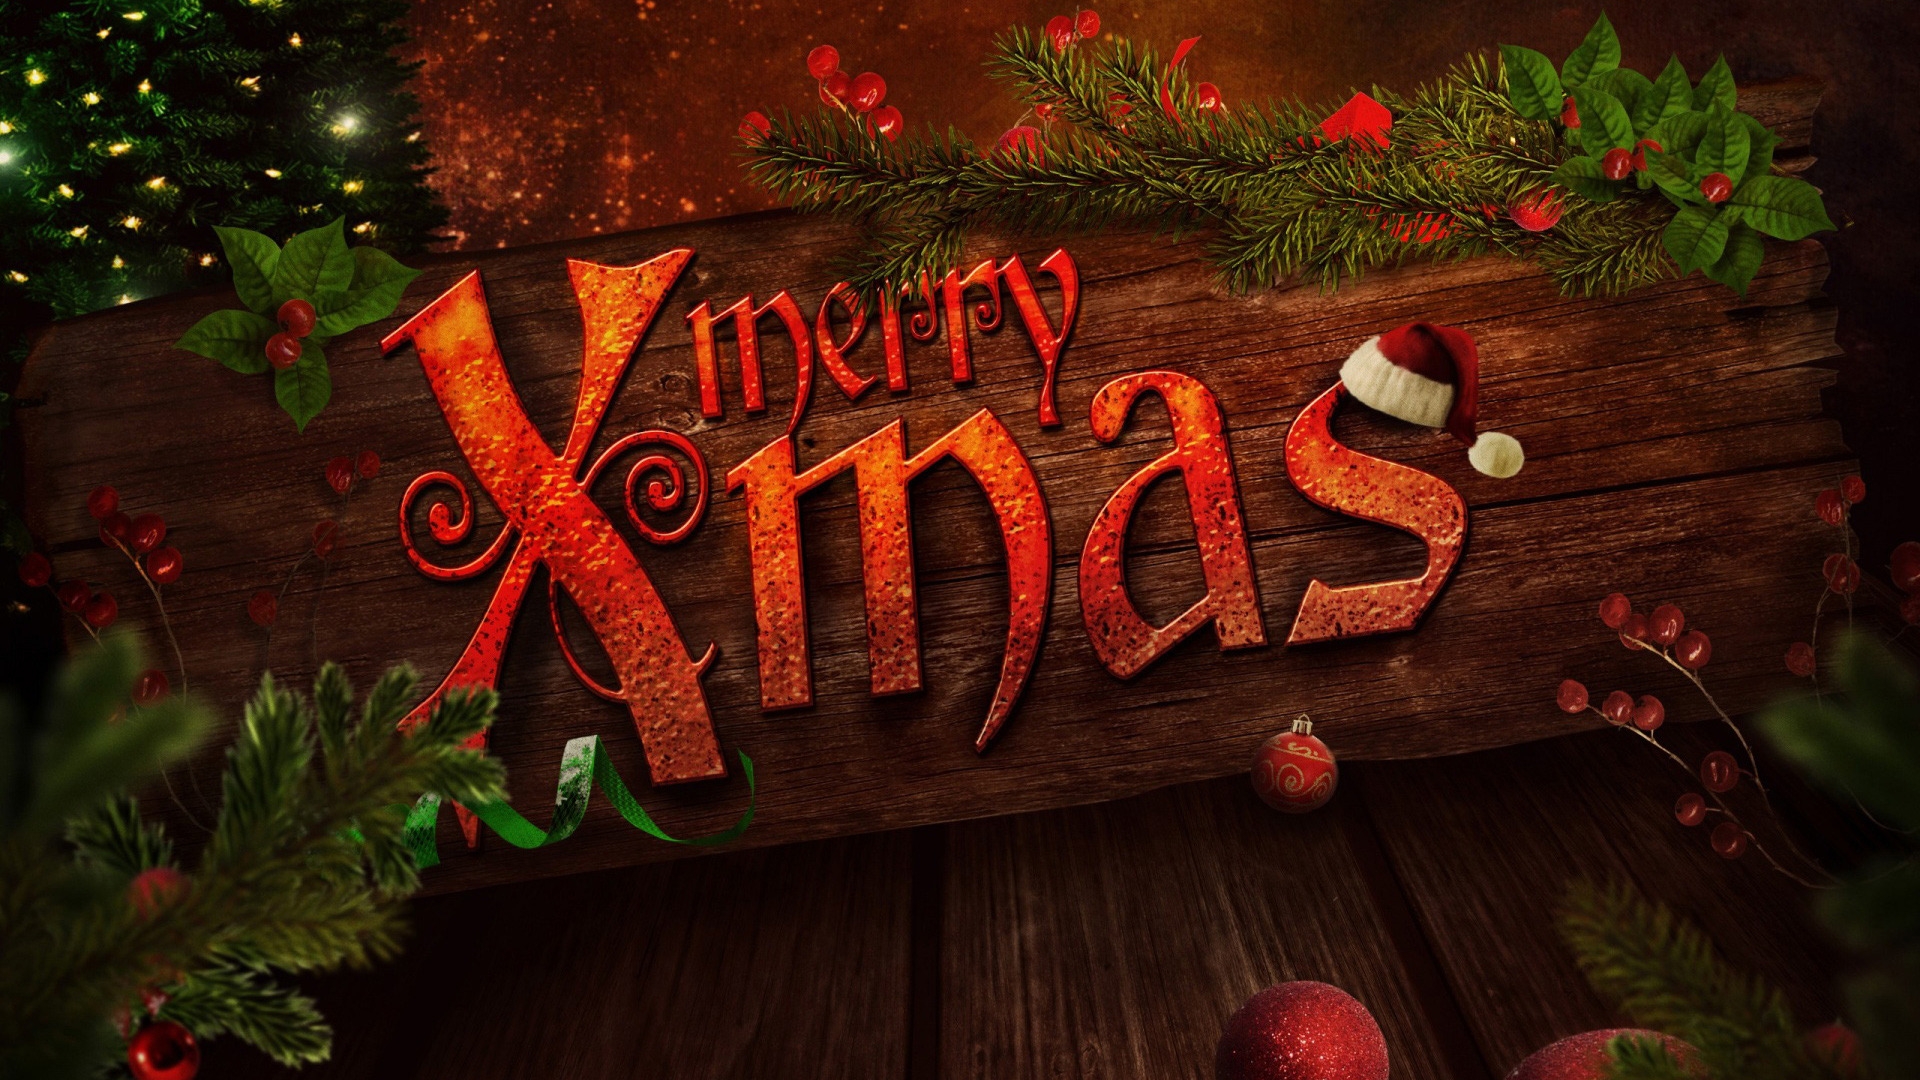 Merry Xmas for 1920 x 1080 HDTV 1080p resolution